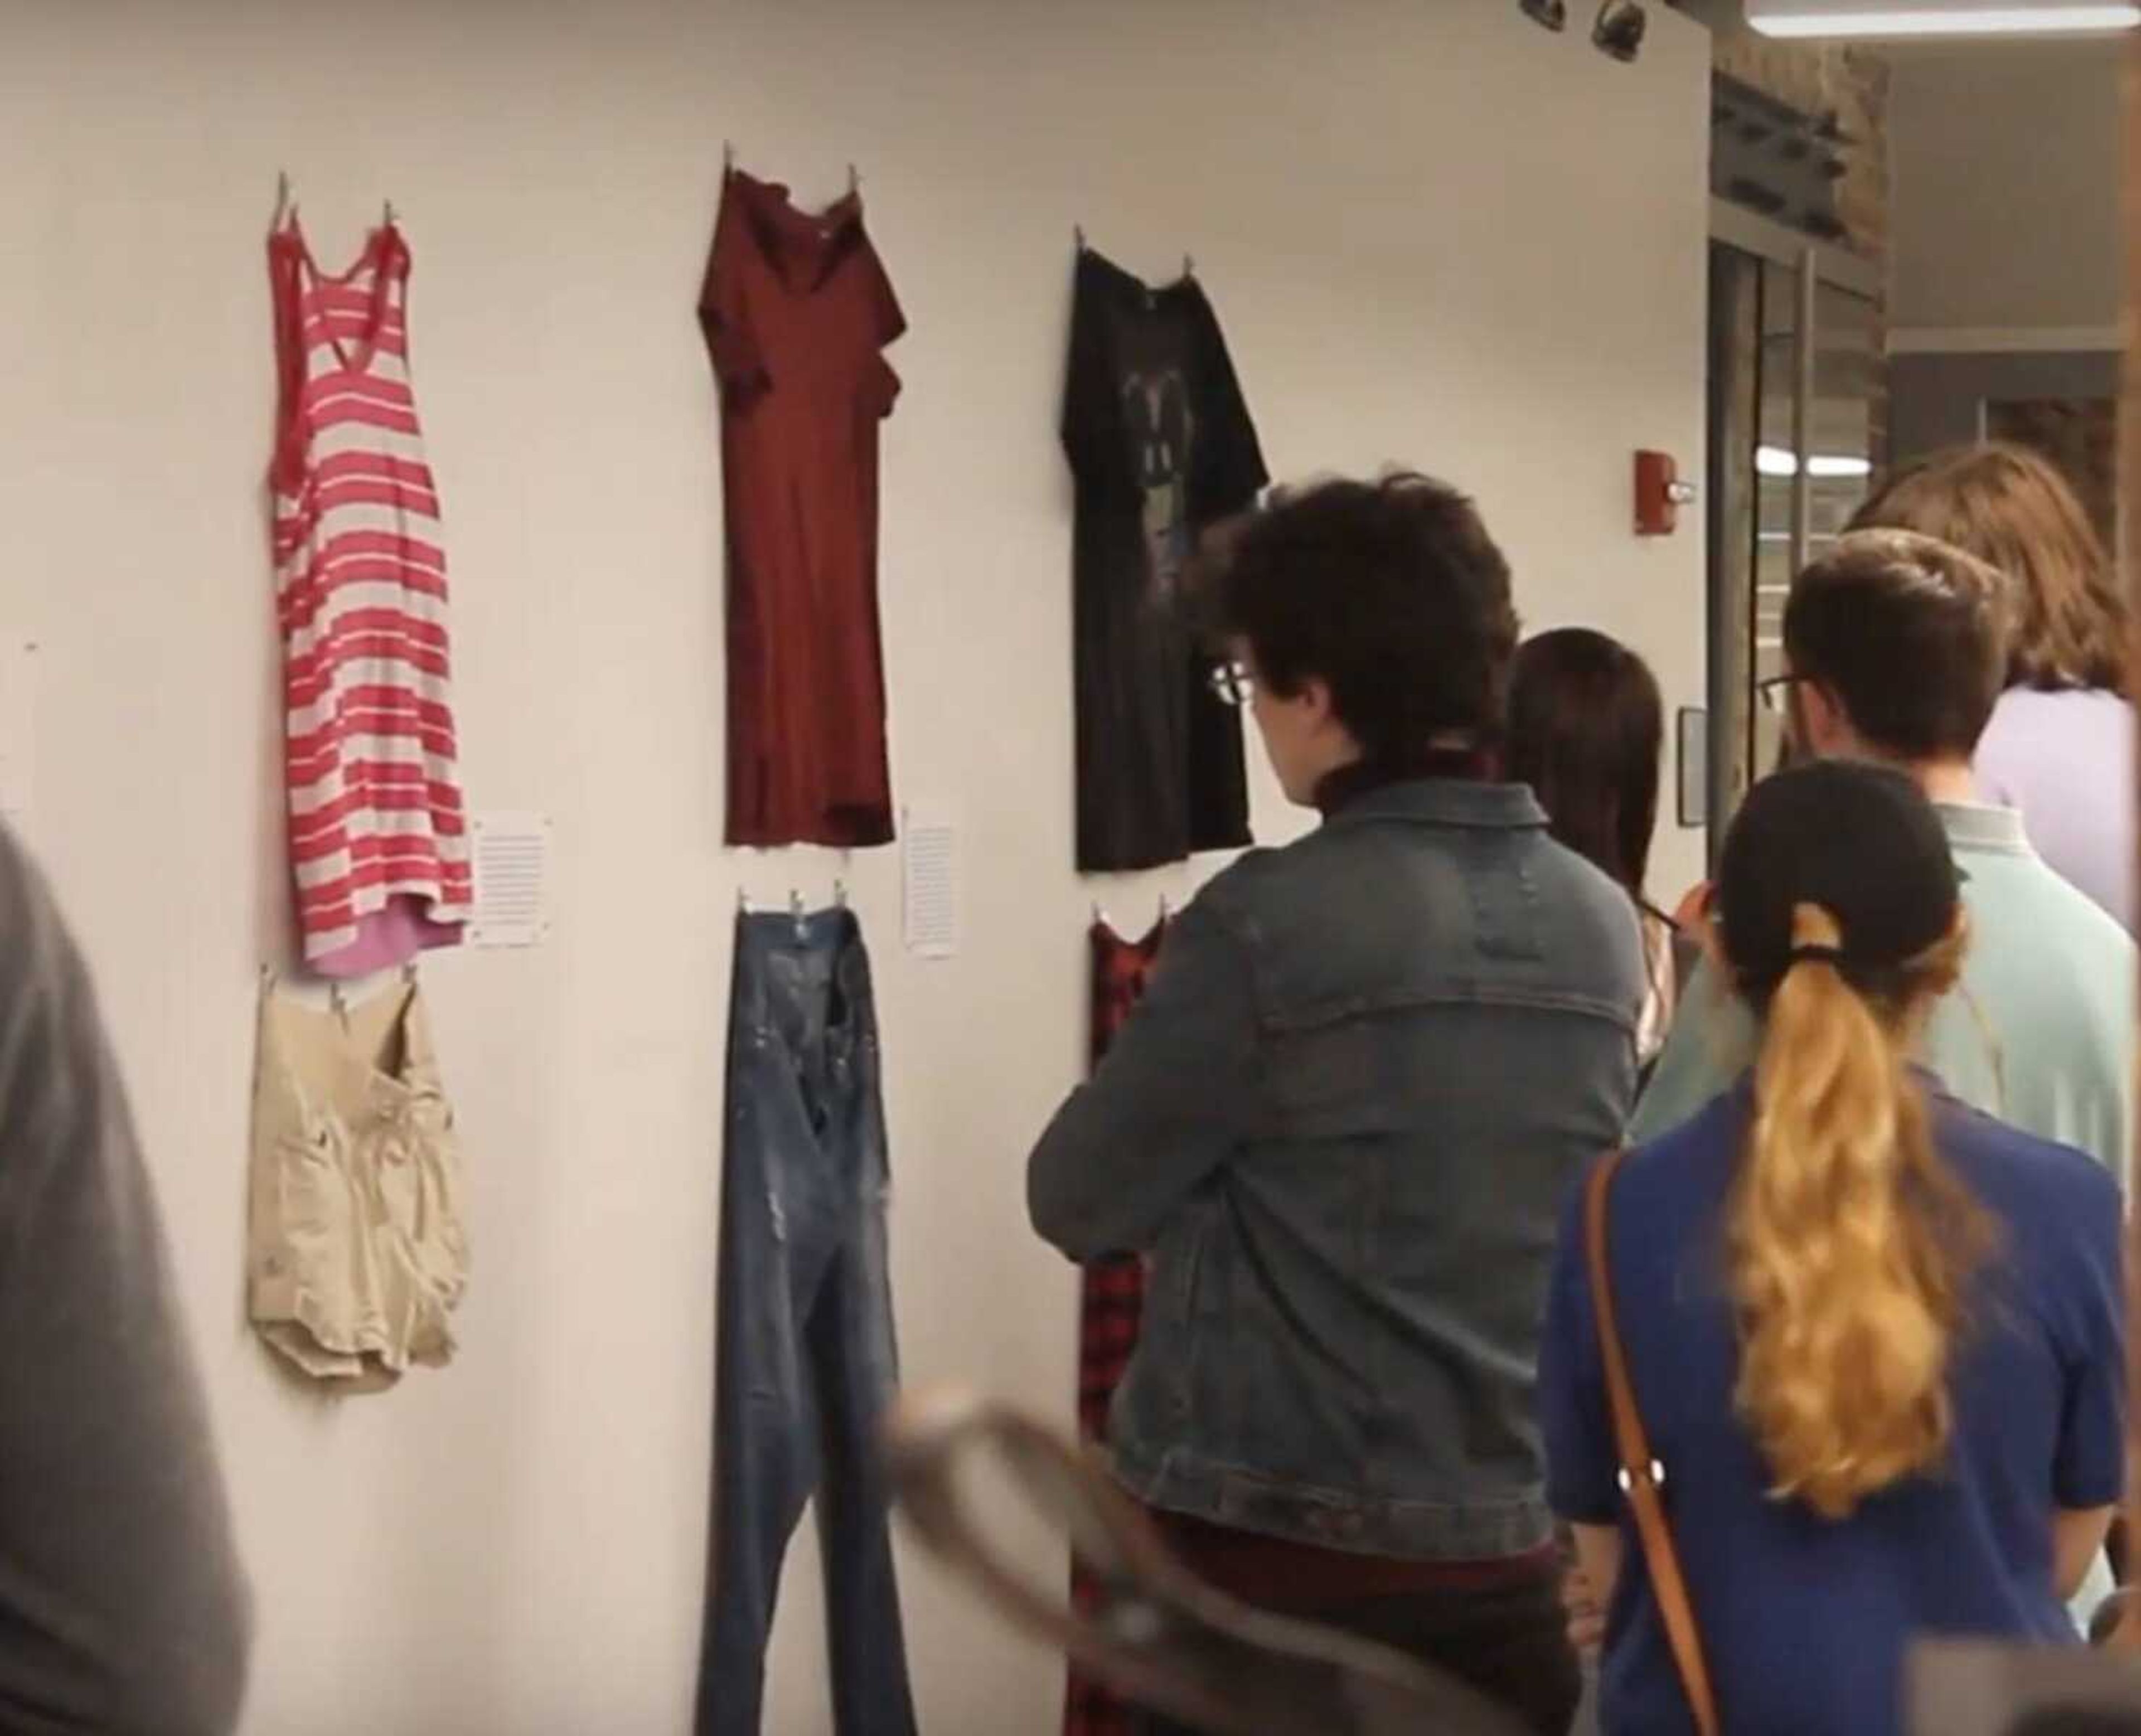 Community members stopped by Catapult April 5 to see the "What Were You Wearing?" exhibit, where sexual assault survivors hung clothes similar to the ones they were wearing at the time of their assault on the way.